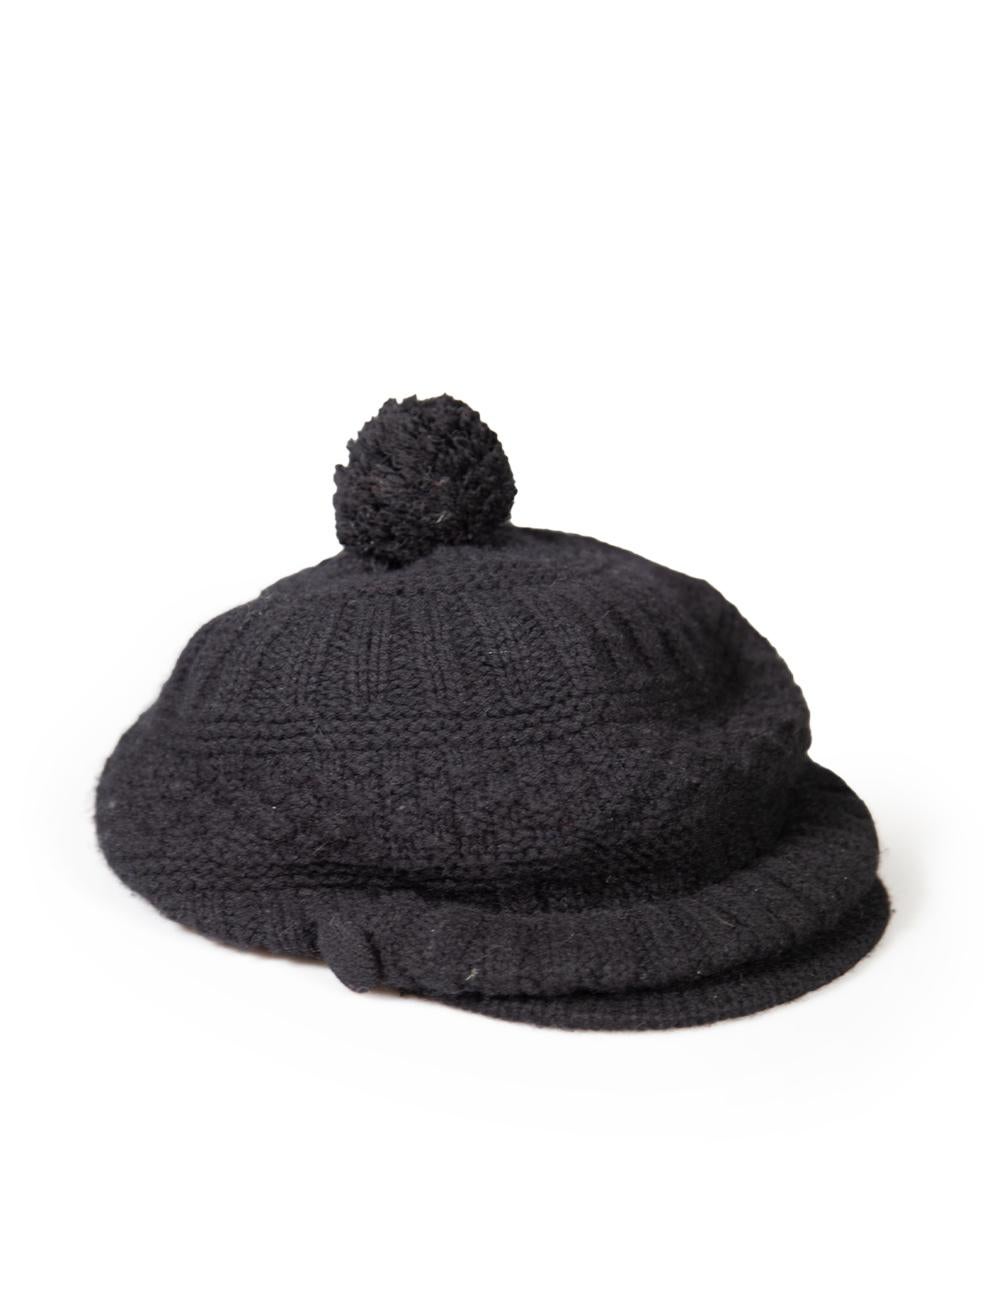 CONDITION is Very good. Minimal wear to hat is evident. Minimal wear with overall light pilling on this used Yohji Yamamoto designer resale item.
 
 
 
 Details
 
 
 Black
 
 Wool
 
 Bakerboy cap
 
 Pom pom detail
 
 Knitted
 
 
 
 
 
 Made in